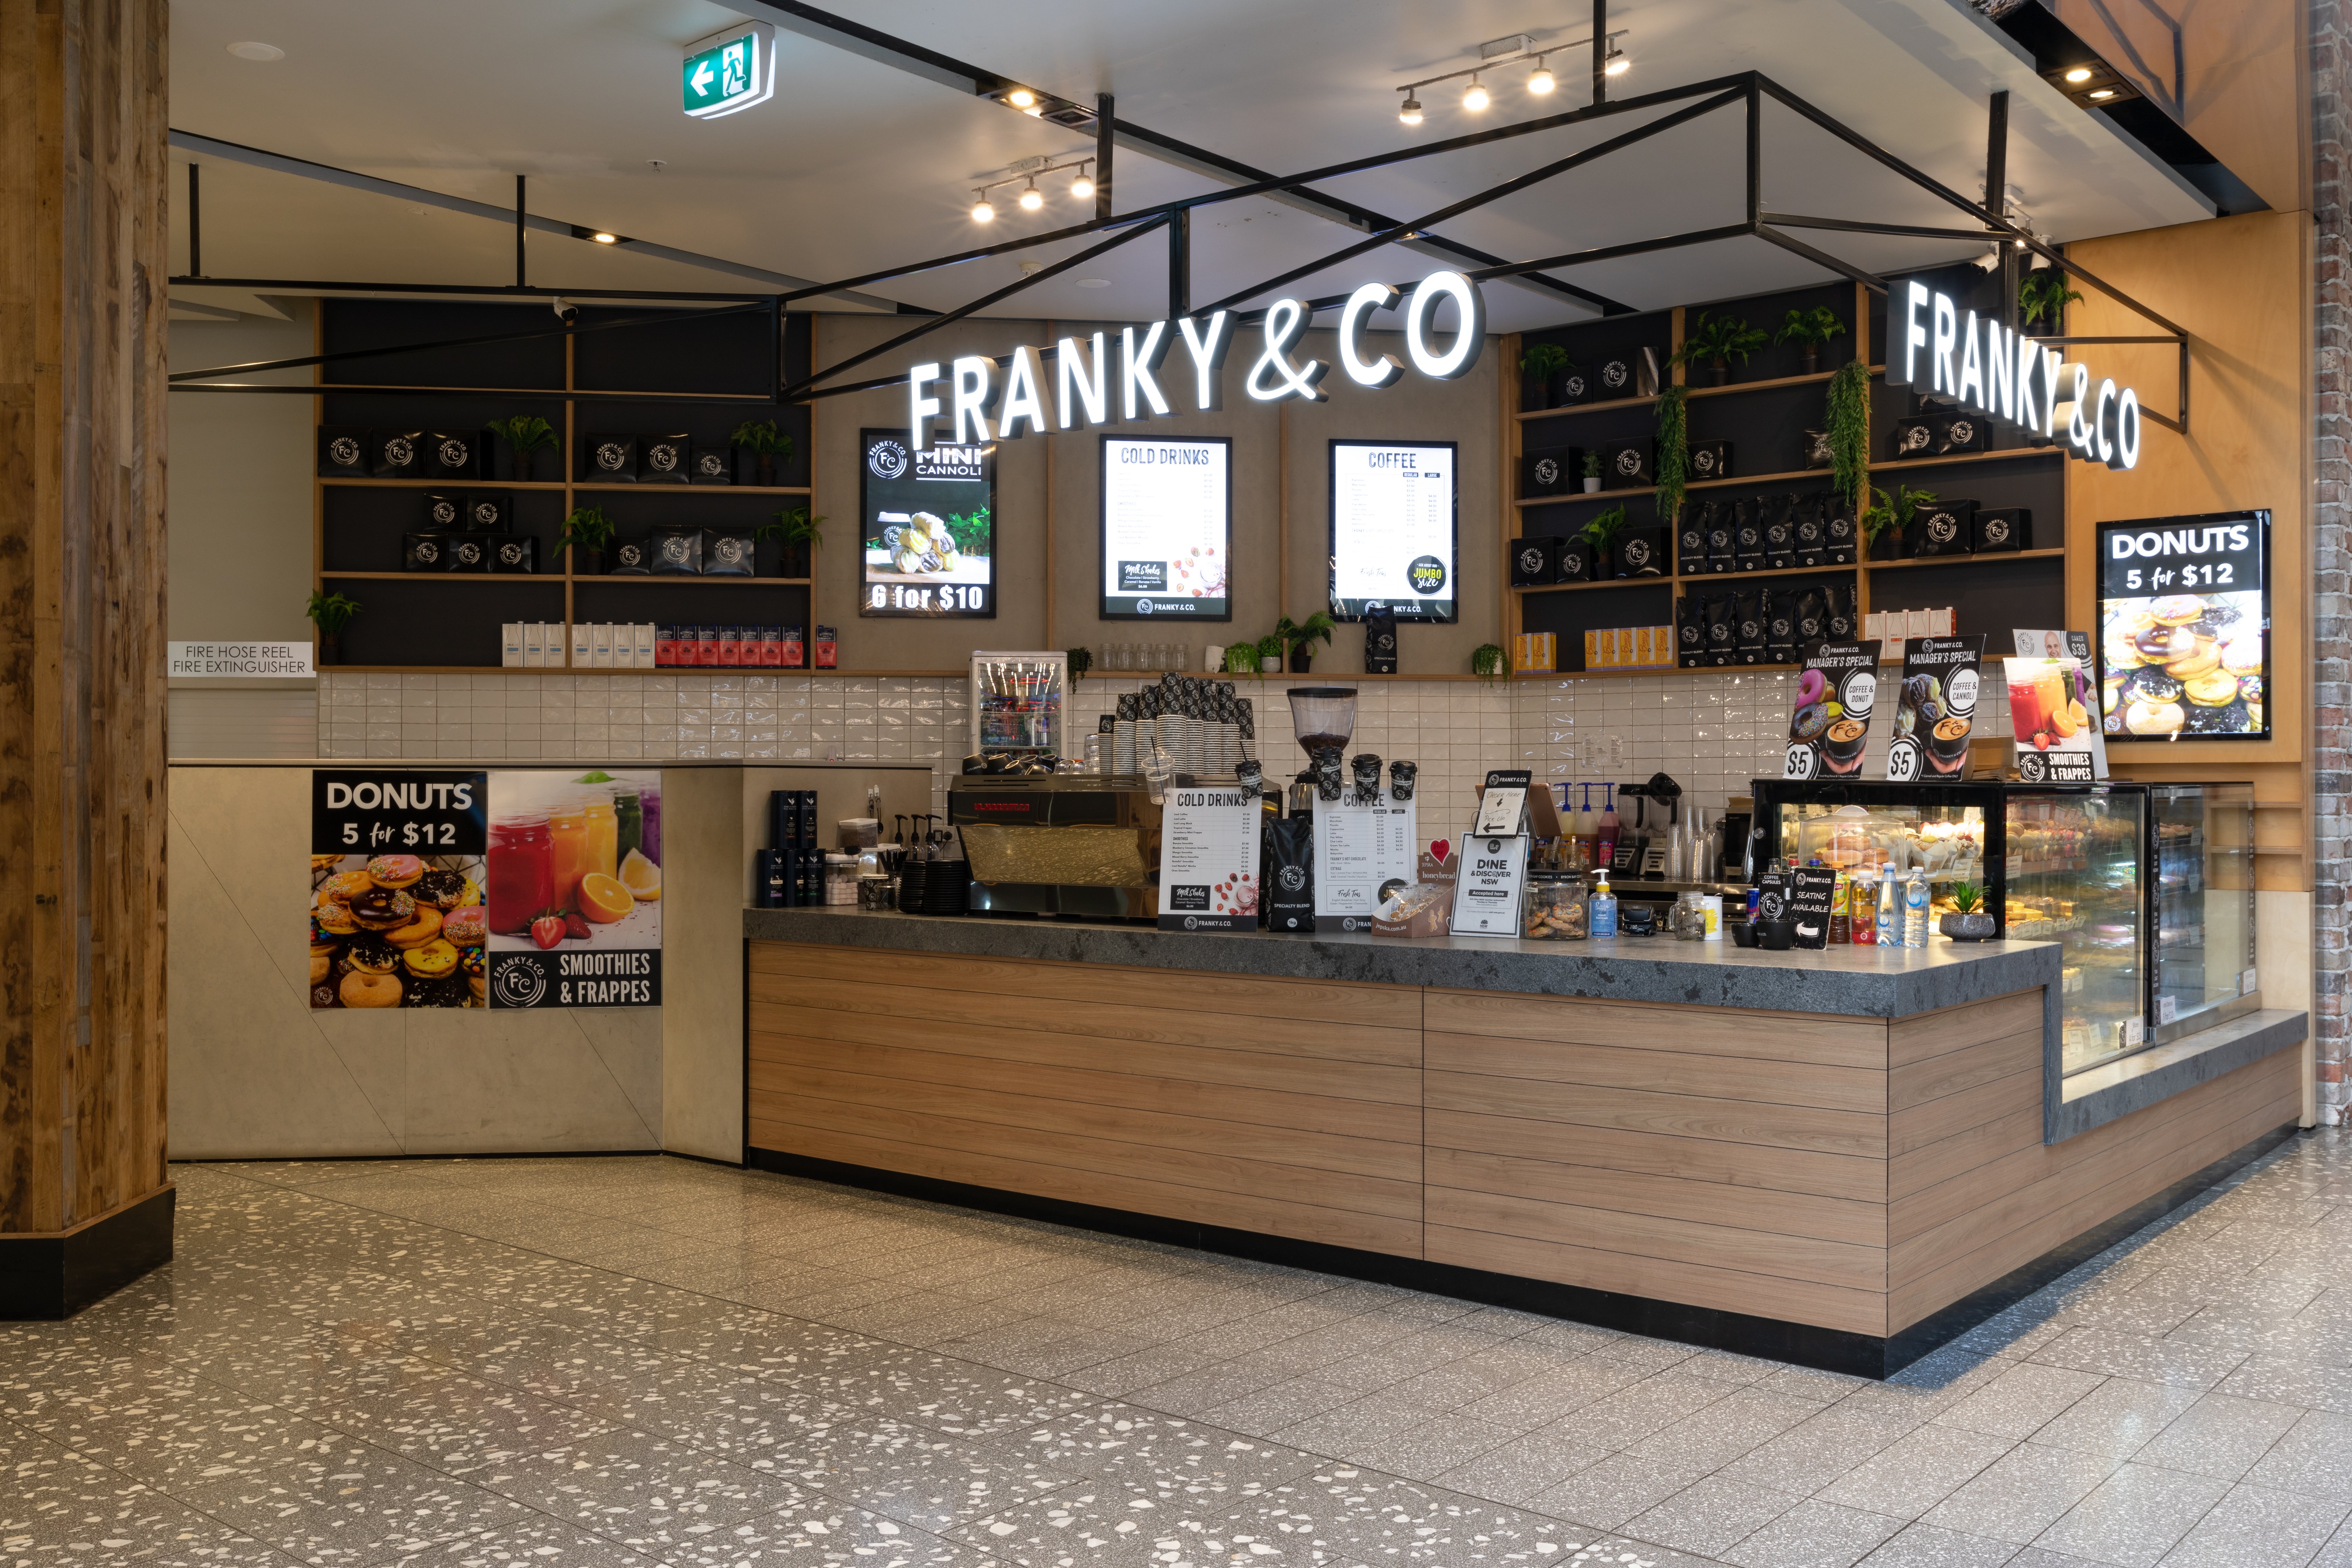 220614-MacarthurSquare-4 Franky and Co.jpg